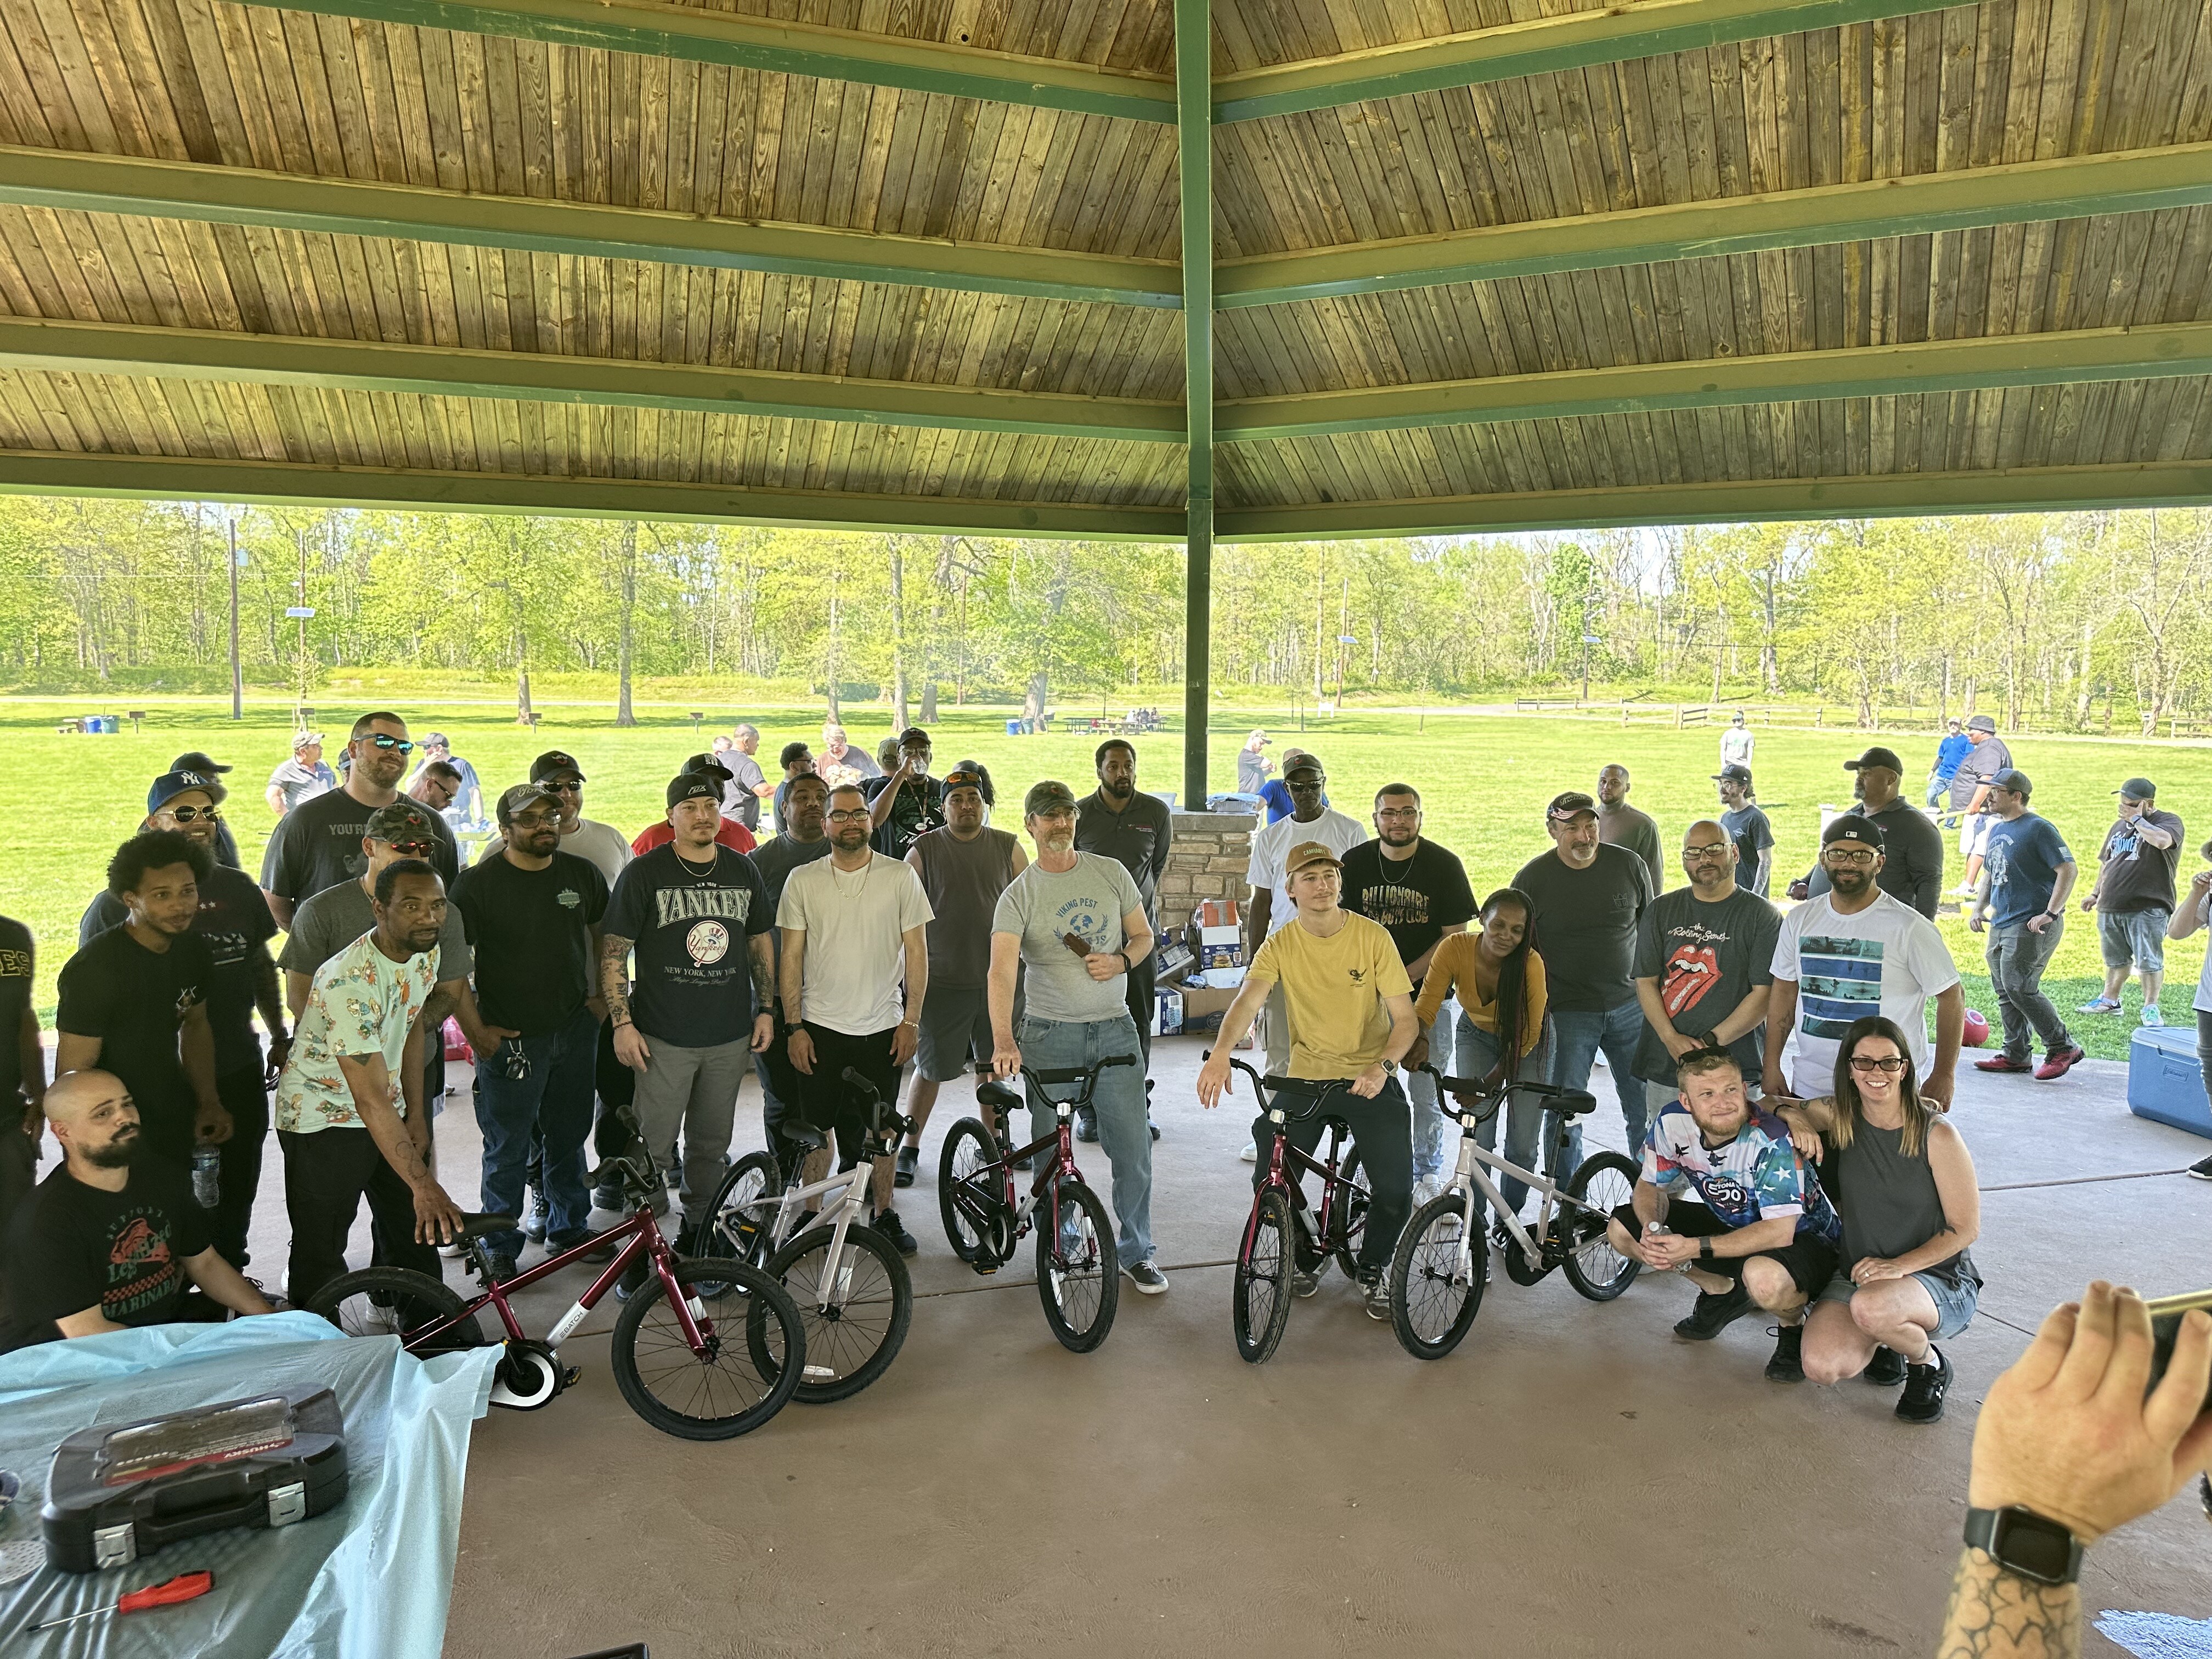 Viking Pest Control Organizes a Charity Bike Build for Local Families